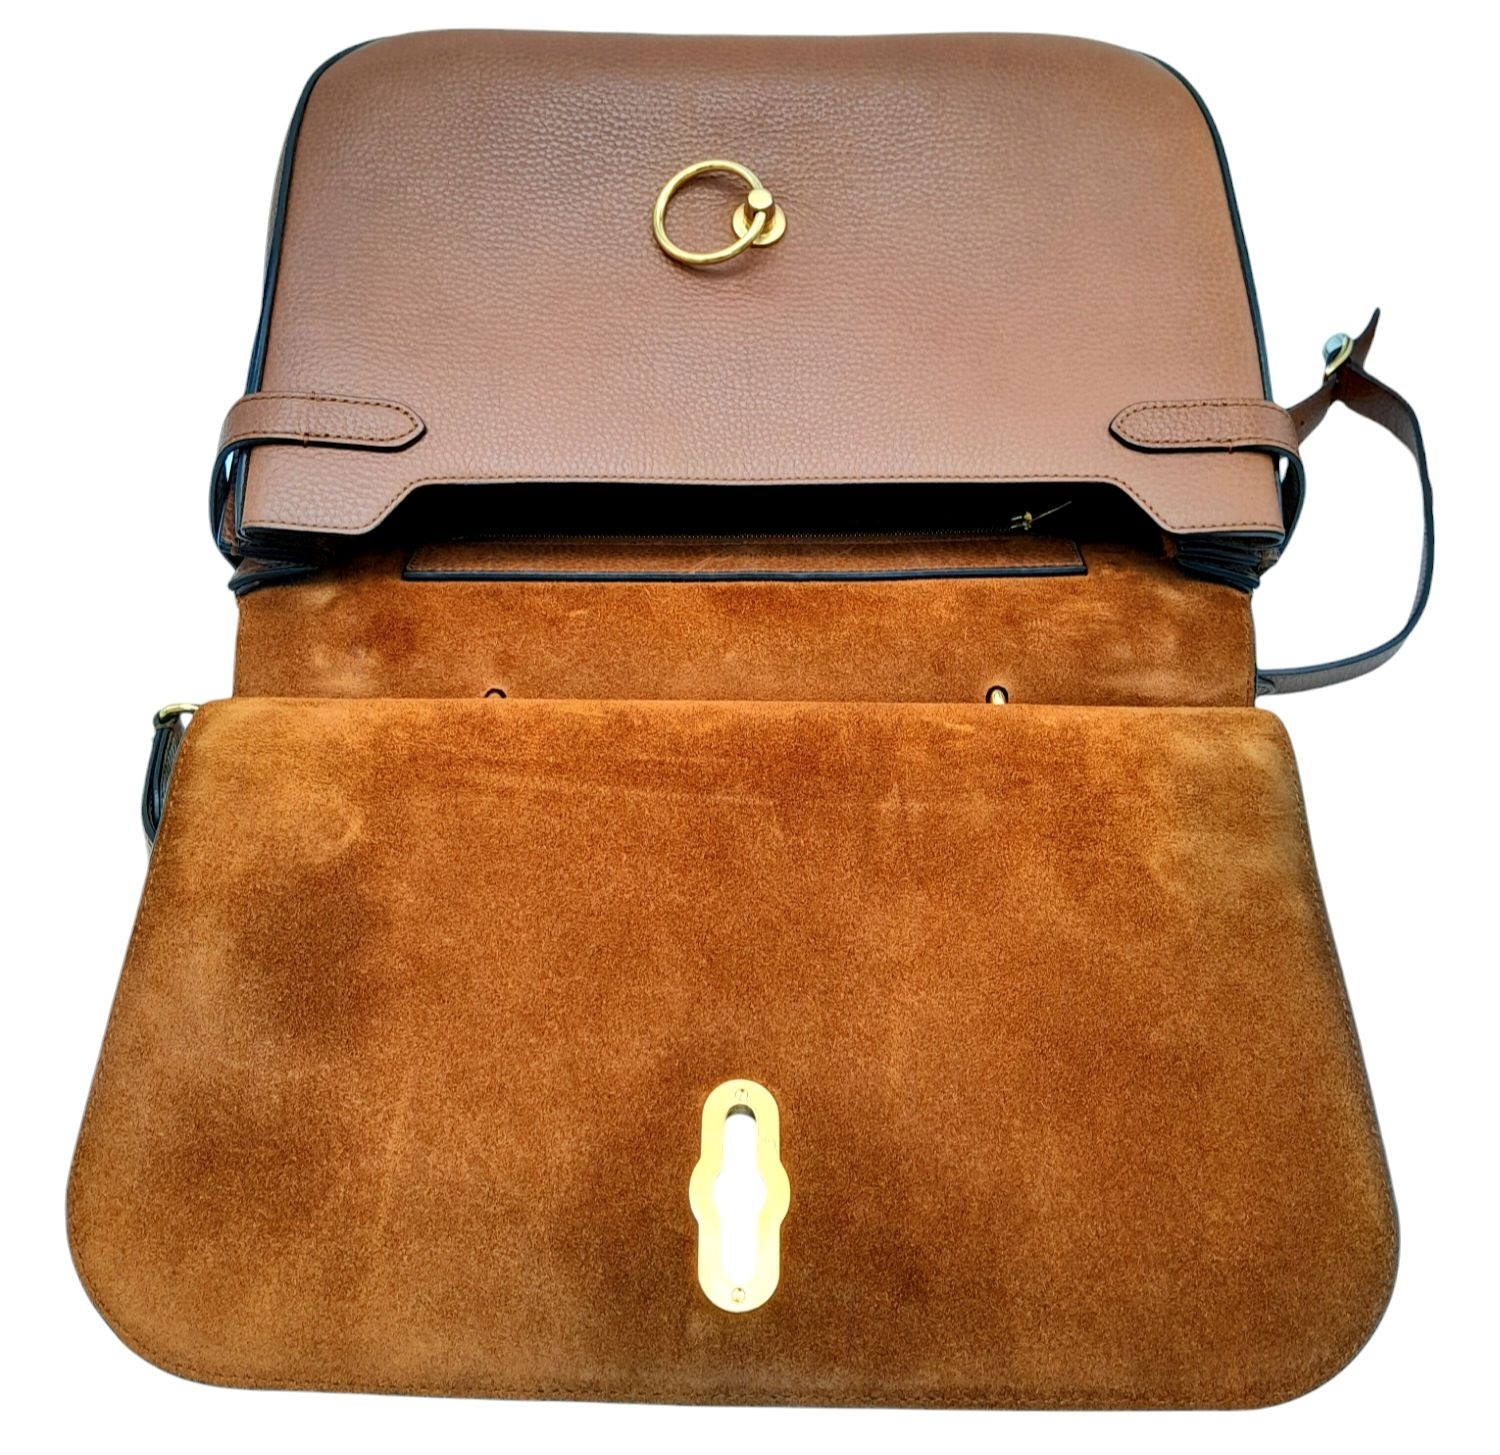 A Mulberry Amberley Satchel Handbag. Brown leather exterior with gold tone hardware. Flap-over front - Image 13 of 14